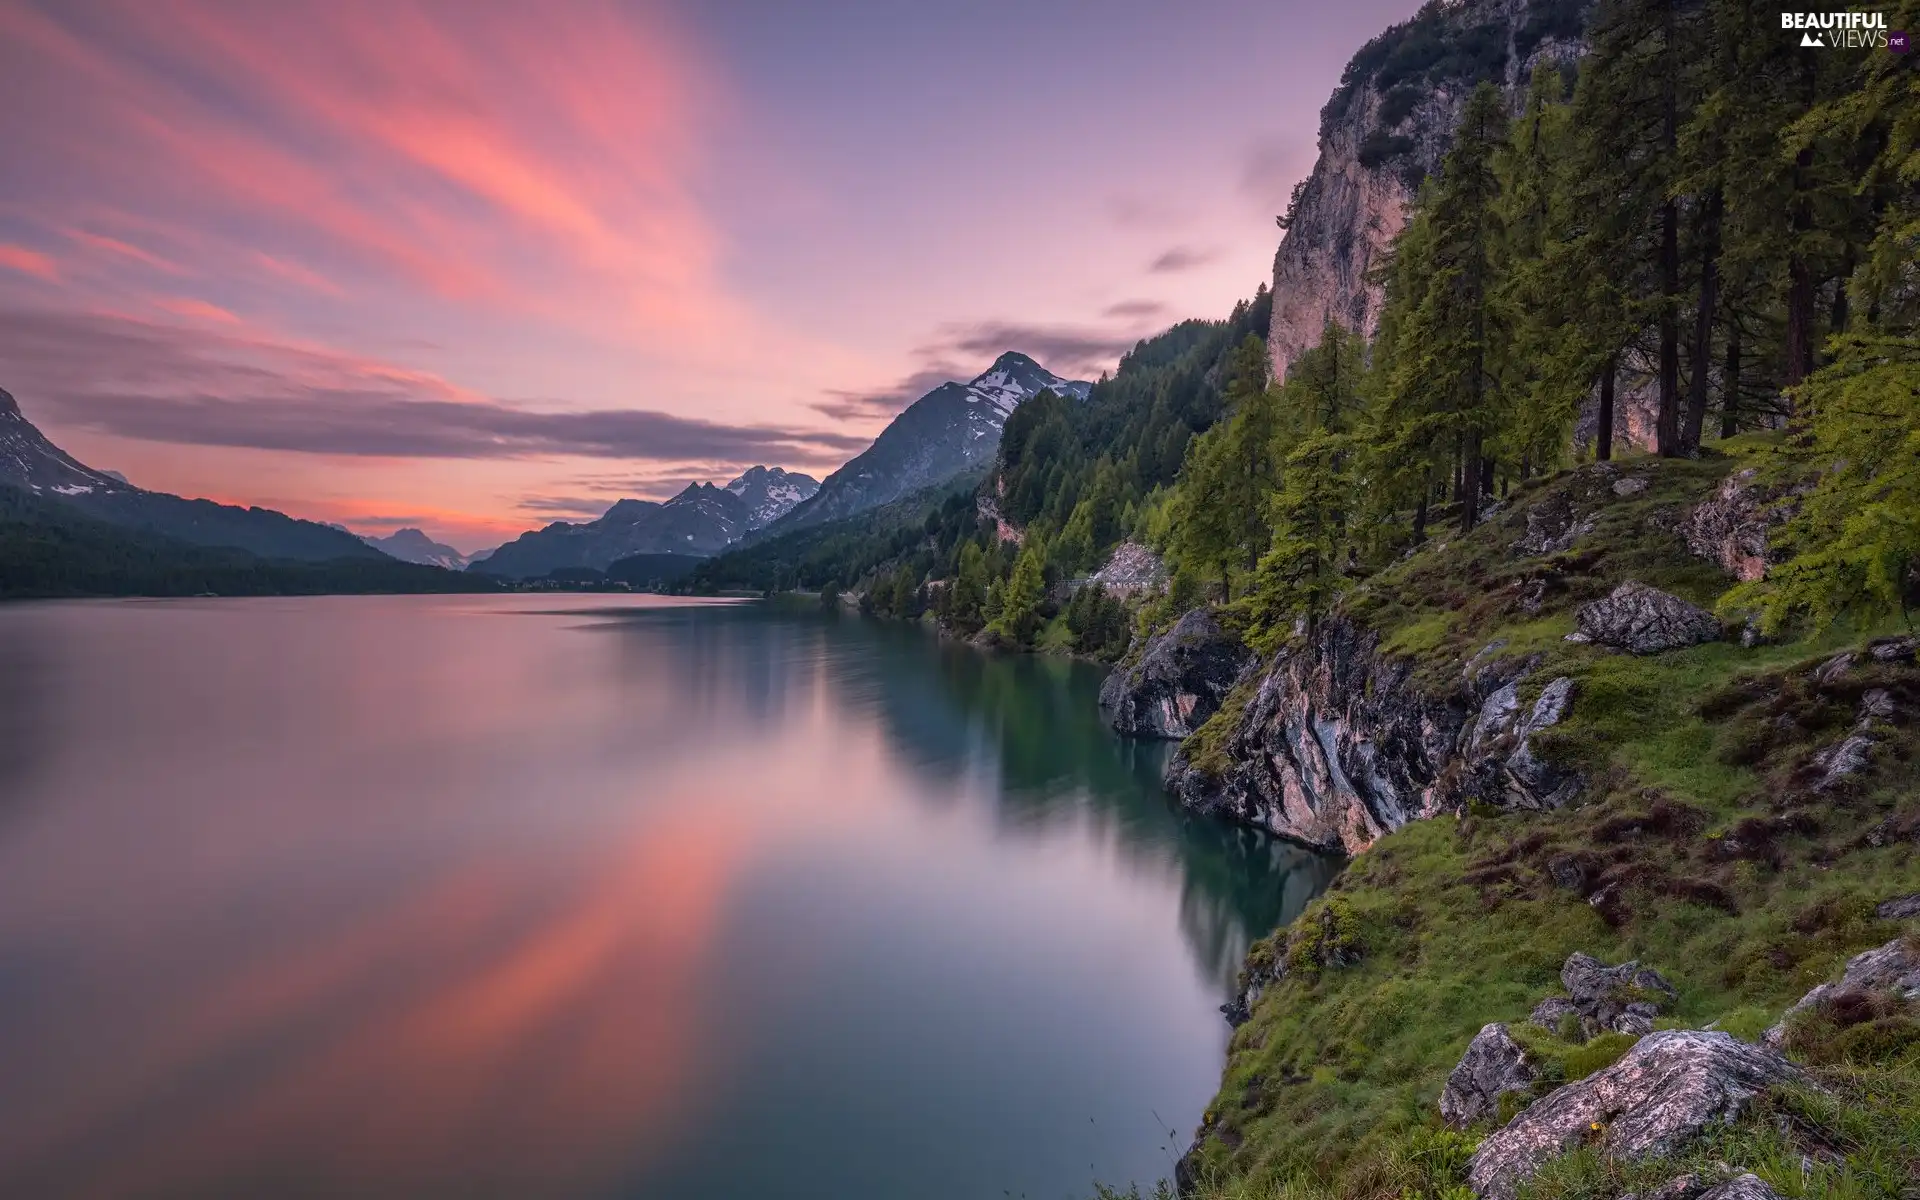 Mountains, Lake Silsersee, Great Sunsets, forest, viewes, Engadin Valley, Switzerland, trees